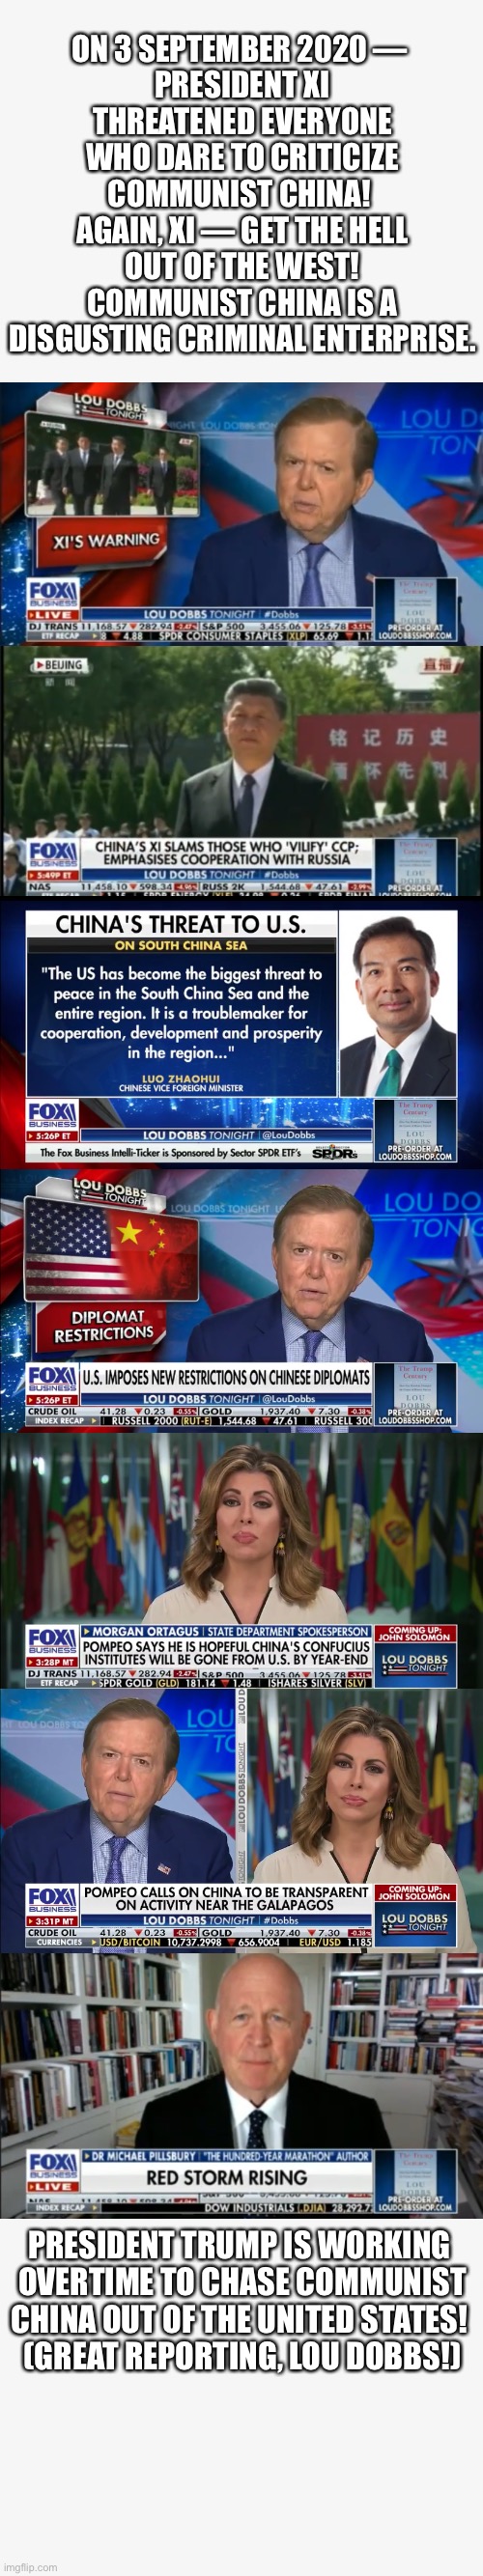 You must learn to be more polite, Communist China! | ON 3 SEPTEMBER 2020 — 
PRESIDENT XI THREATENED EVERYONE WHO DARE TO CRITICIZE COMMUNIST CHINA! 
AGAIN, XI — GET THE HELL OUT OF THE WEST! COMMUNIST CHINA IS A DISGUSTING CRIMINAL ENTERPRISE. PRESIDENT TRUMP IS WORKING 

OVERTIME TO CHASE COMMUNIST
CHINA OUT OF THE UNITED STATES! 

(GREAT REPORTING, LOU DOBBS!) | image tagged in china,china virus,made in china,communists,president trump,donald trump | made w/ Imgflip meme maker